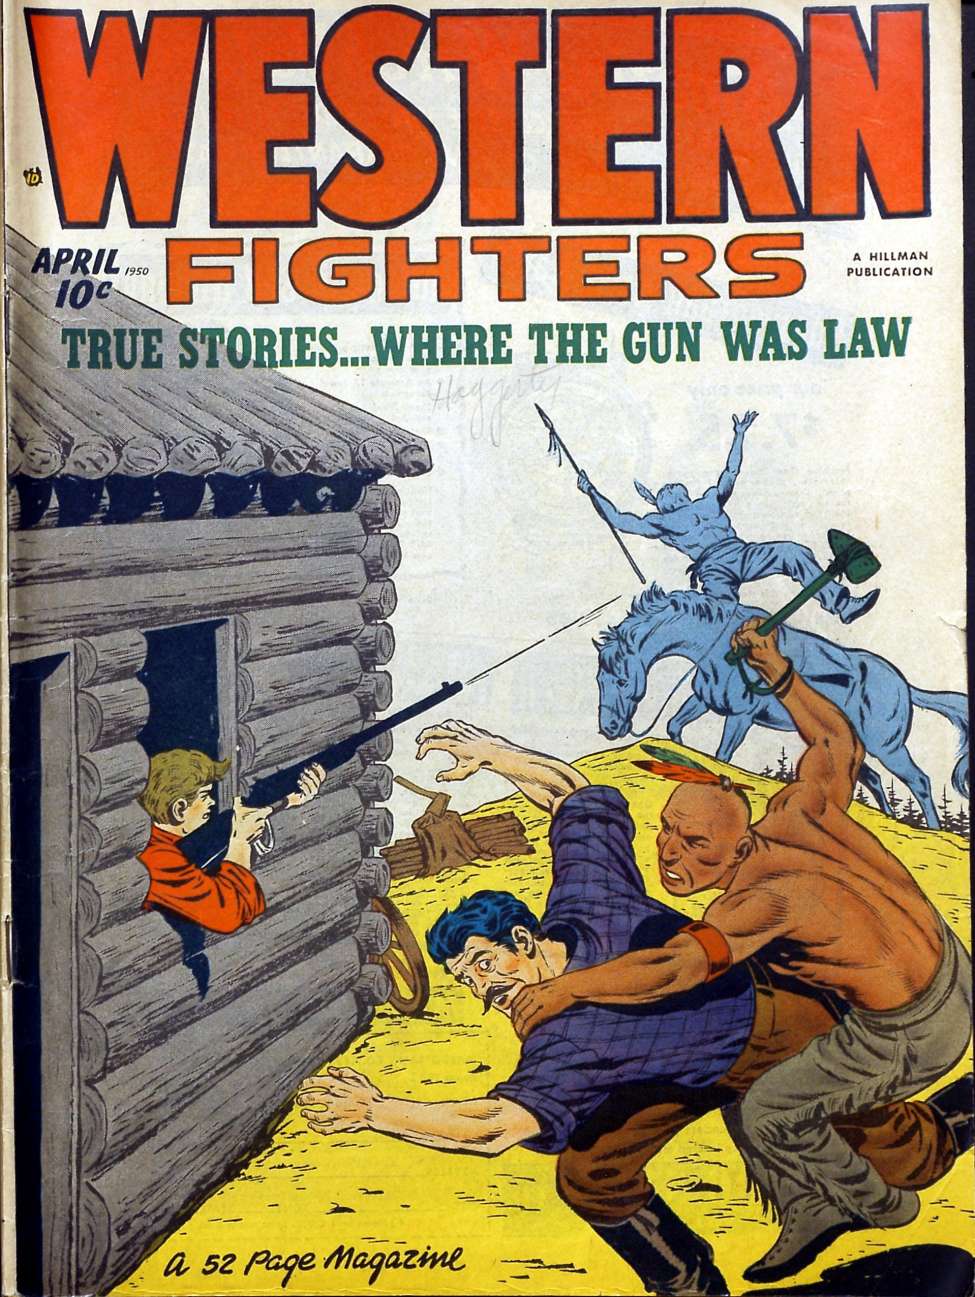 Book Cover For Western Fighters v2 5